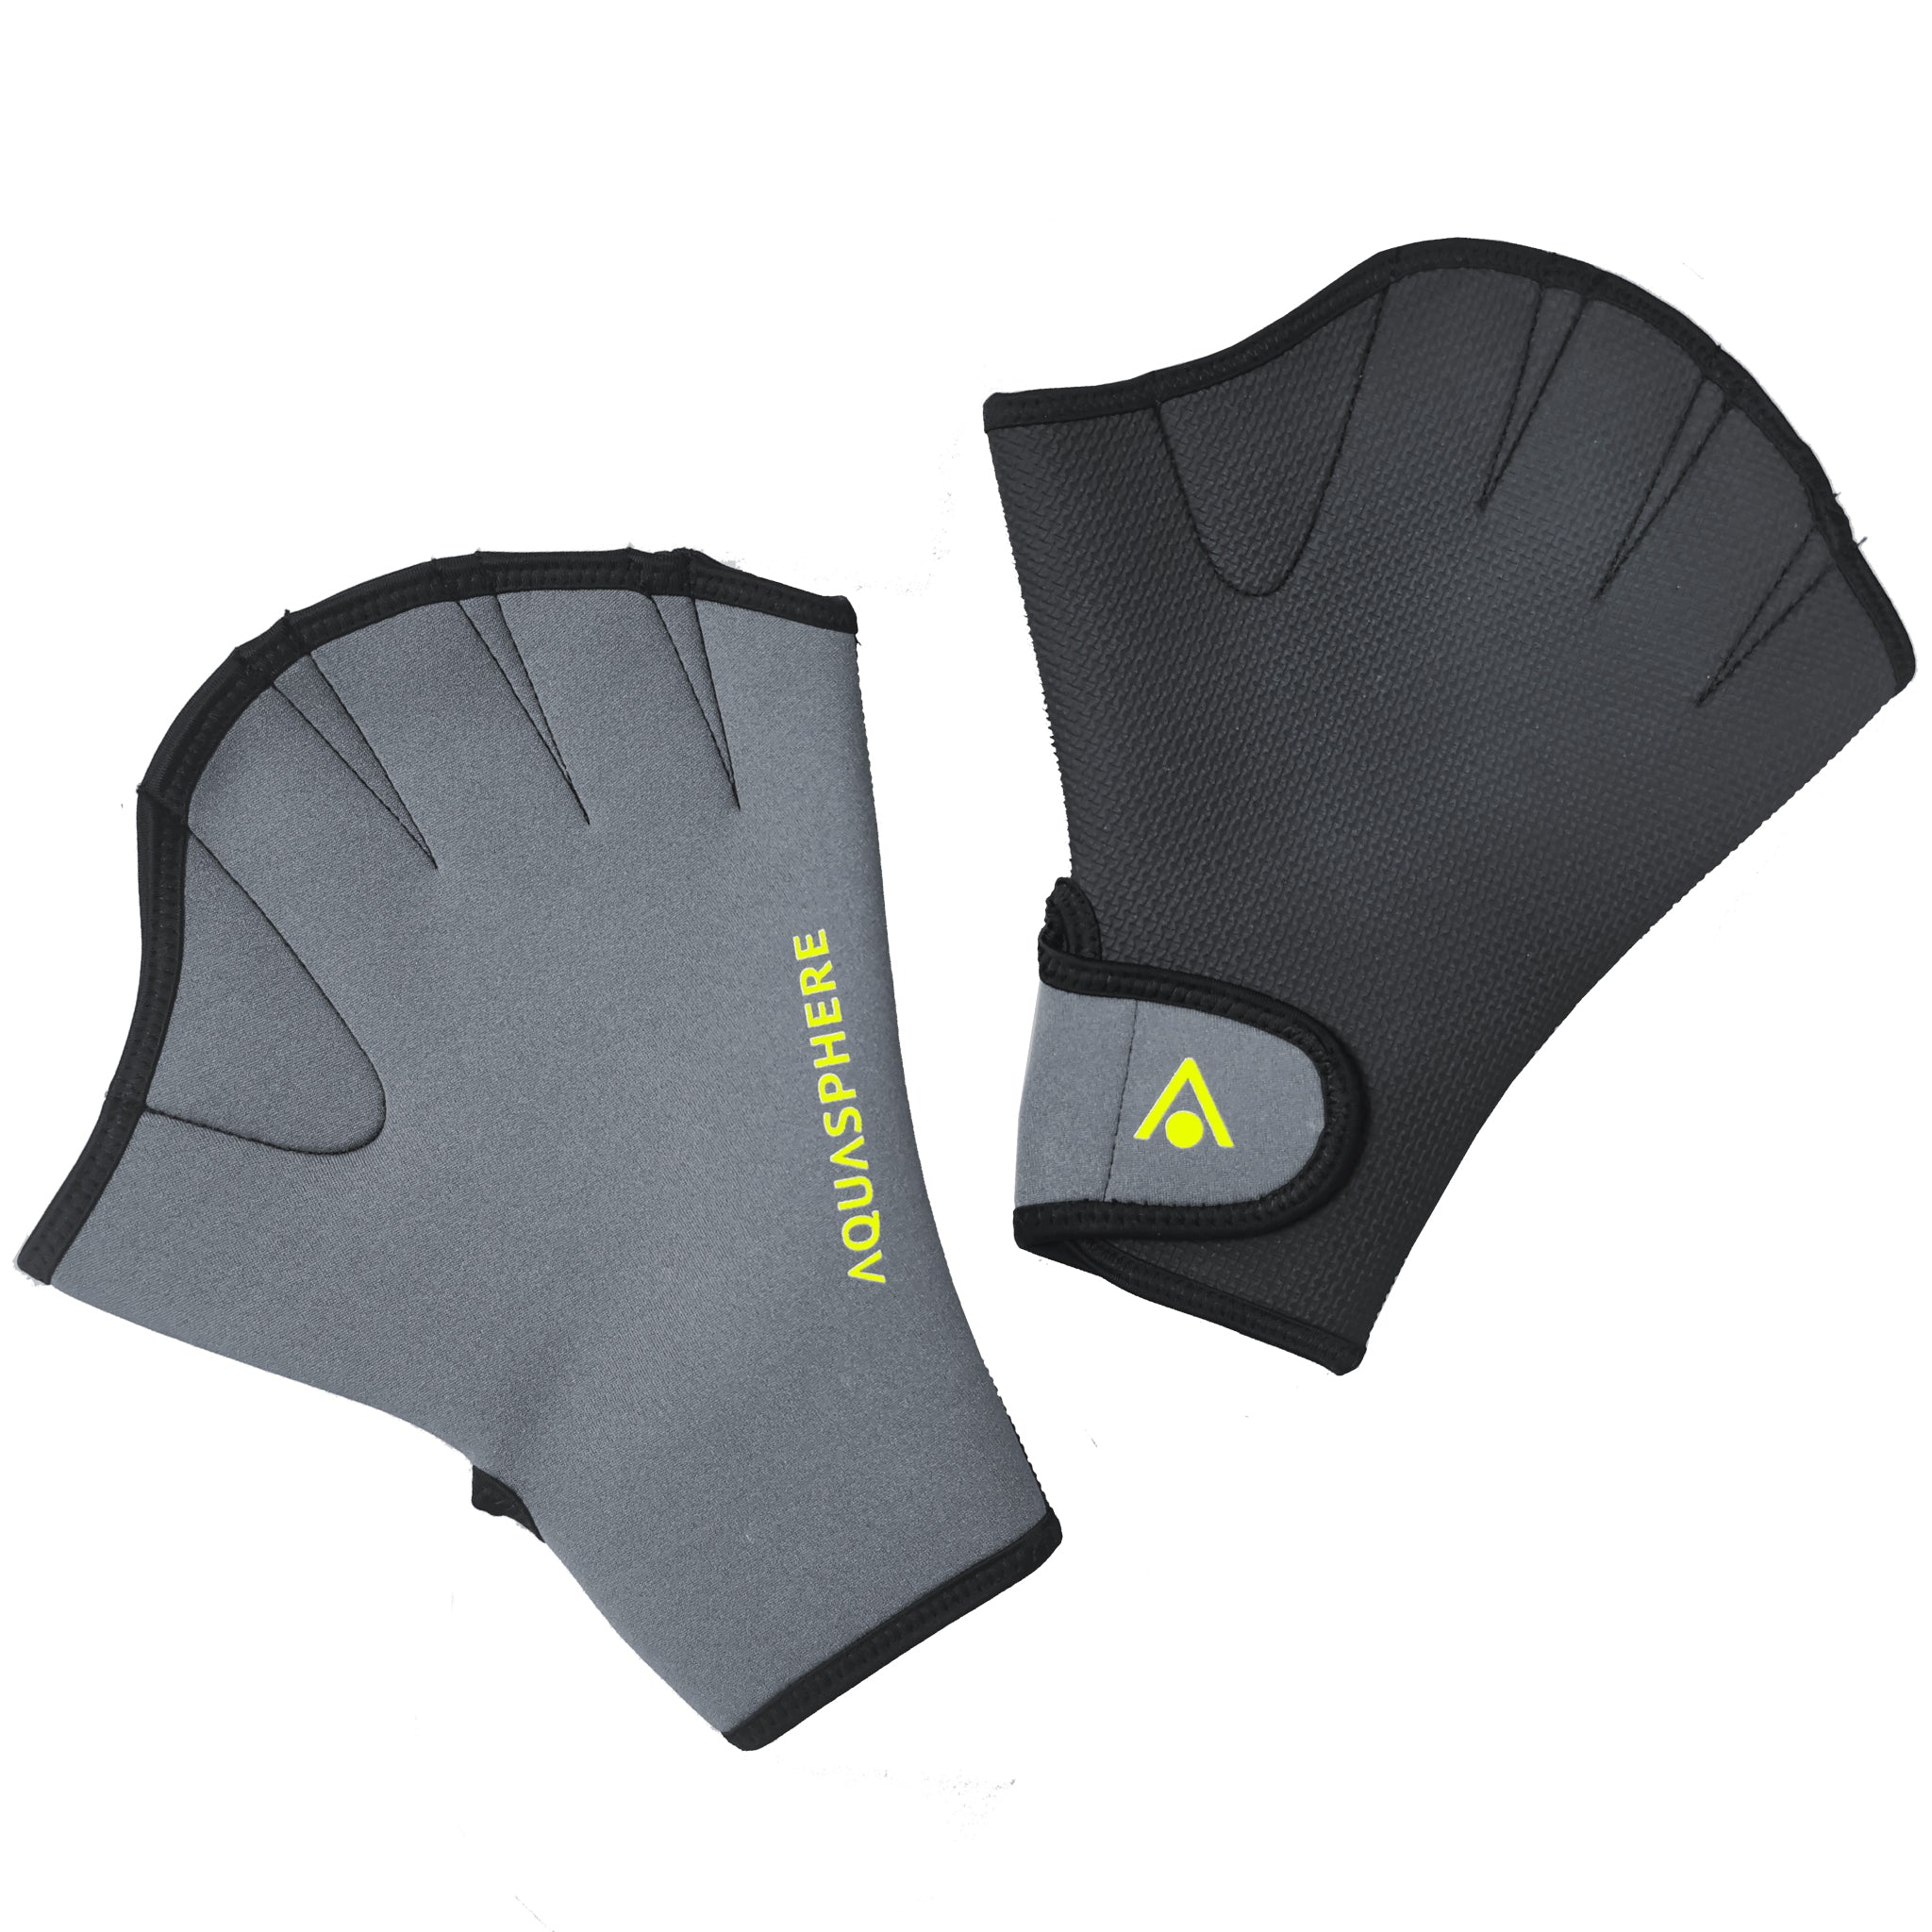 Aquasphere Webbed Swimming Gloves - Front & Back